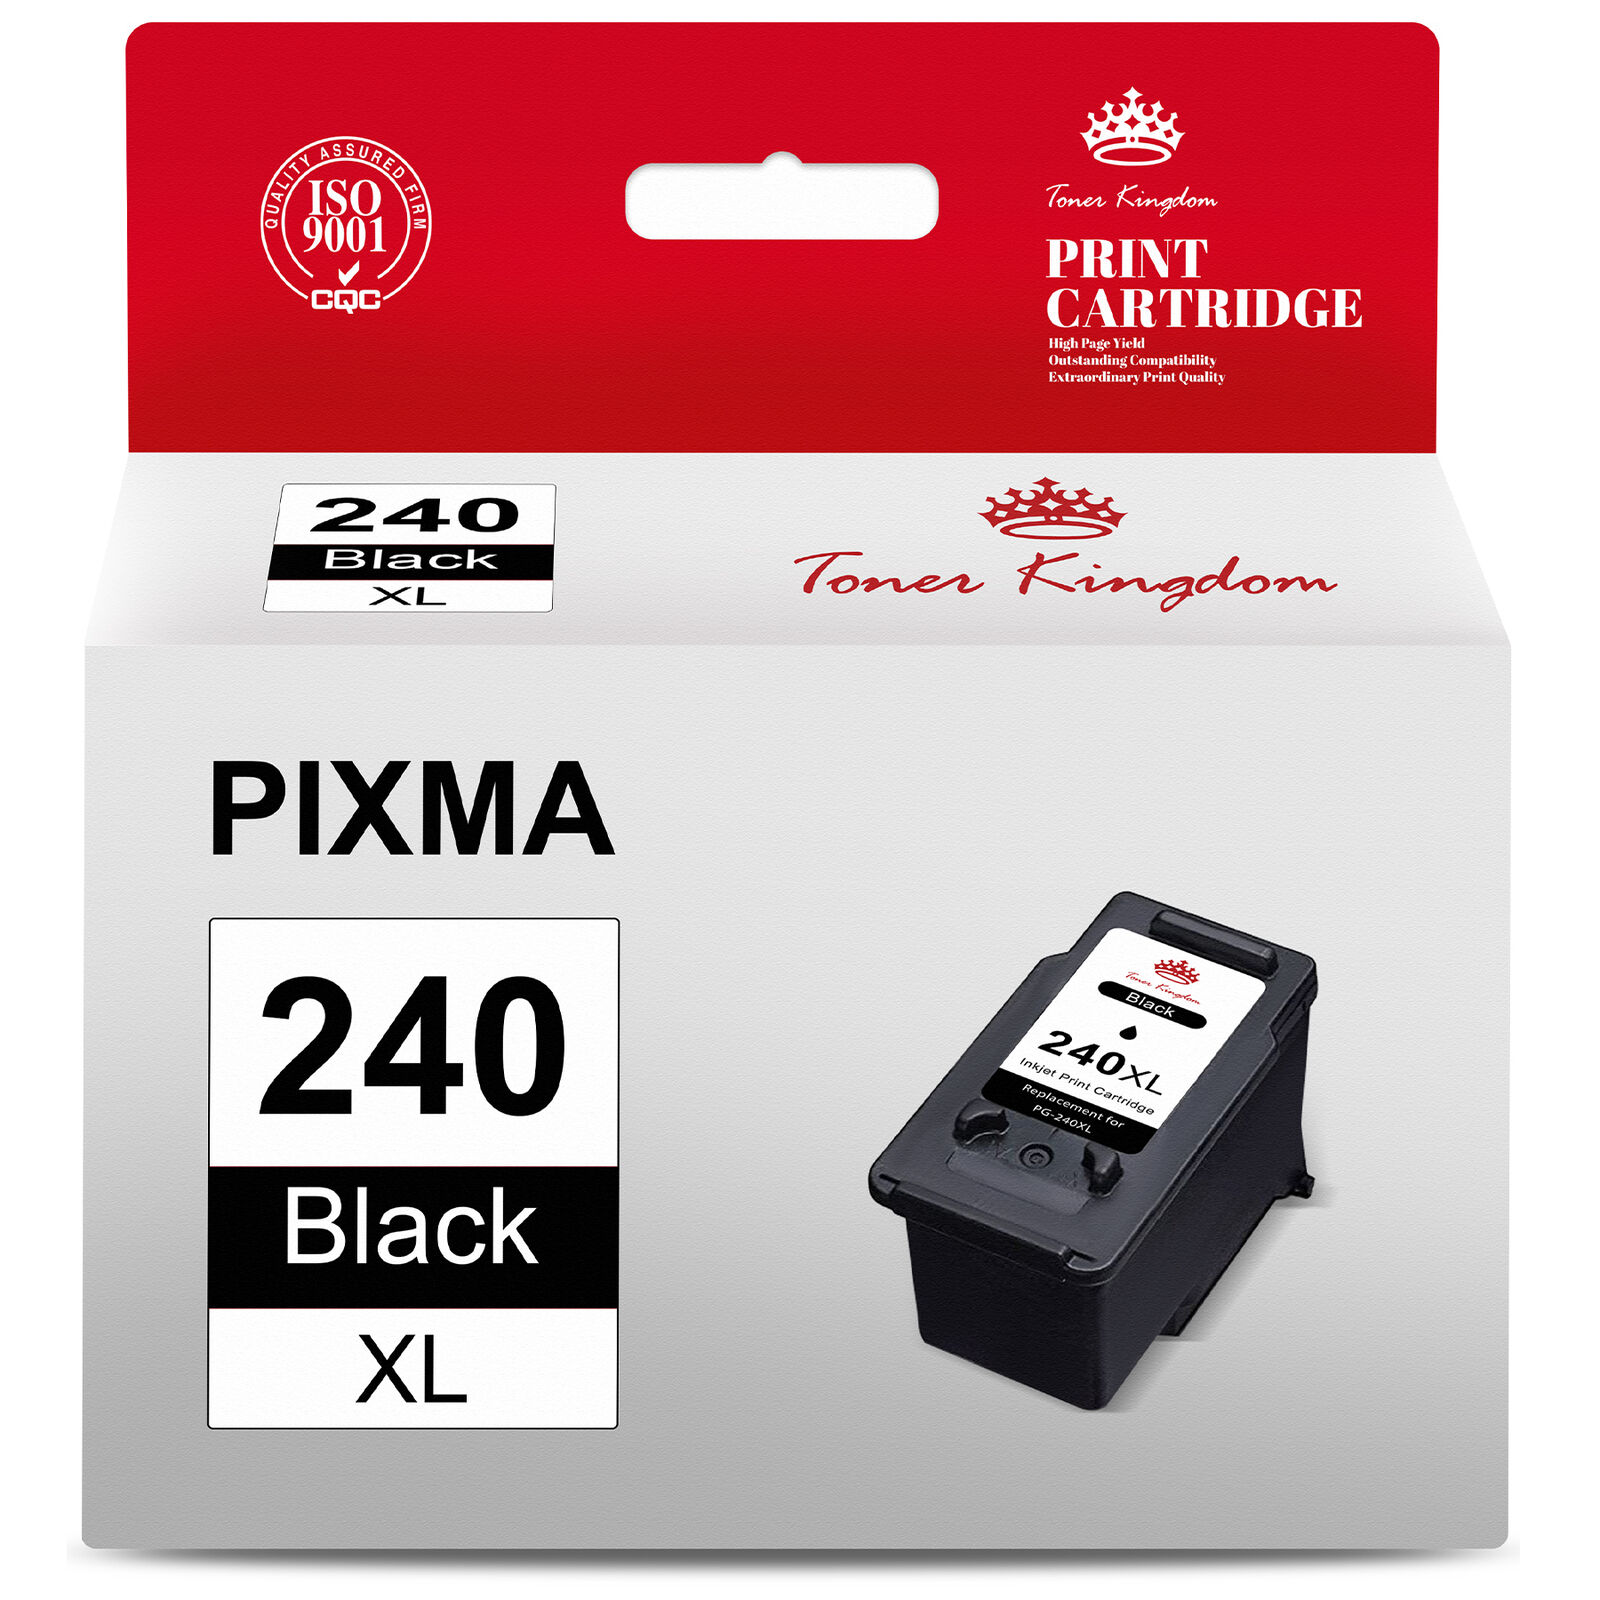 PG- 240 XL CL-241 XL Black Color Ink Cartridge for Canon Pixma MG3620 MG3520 lot